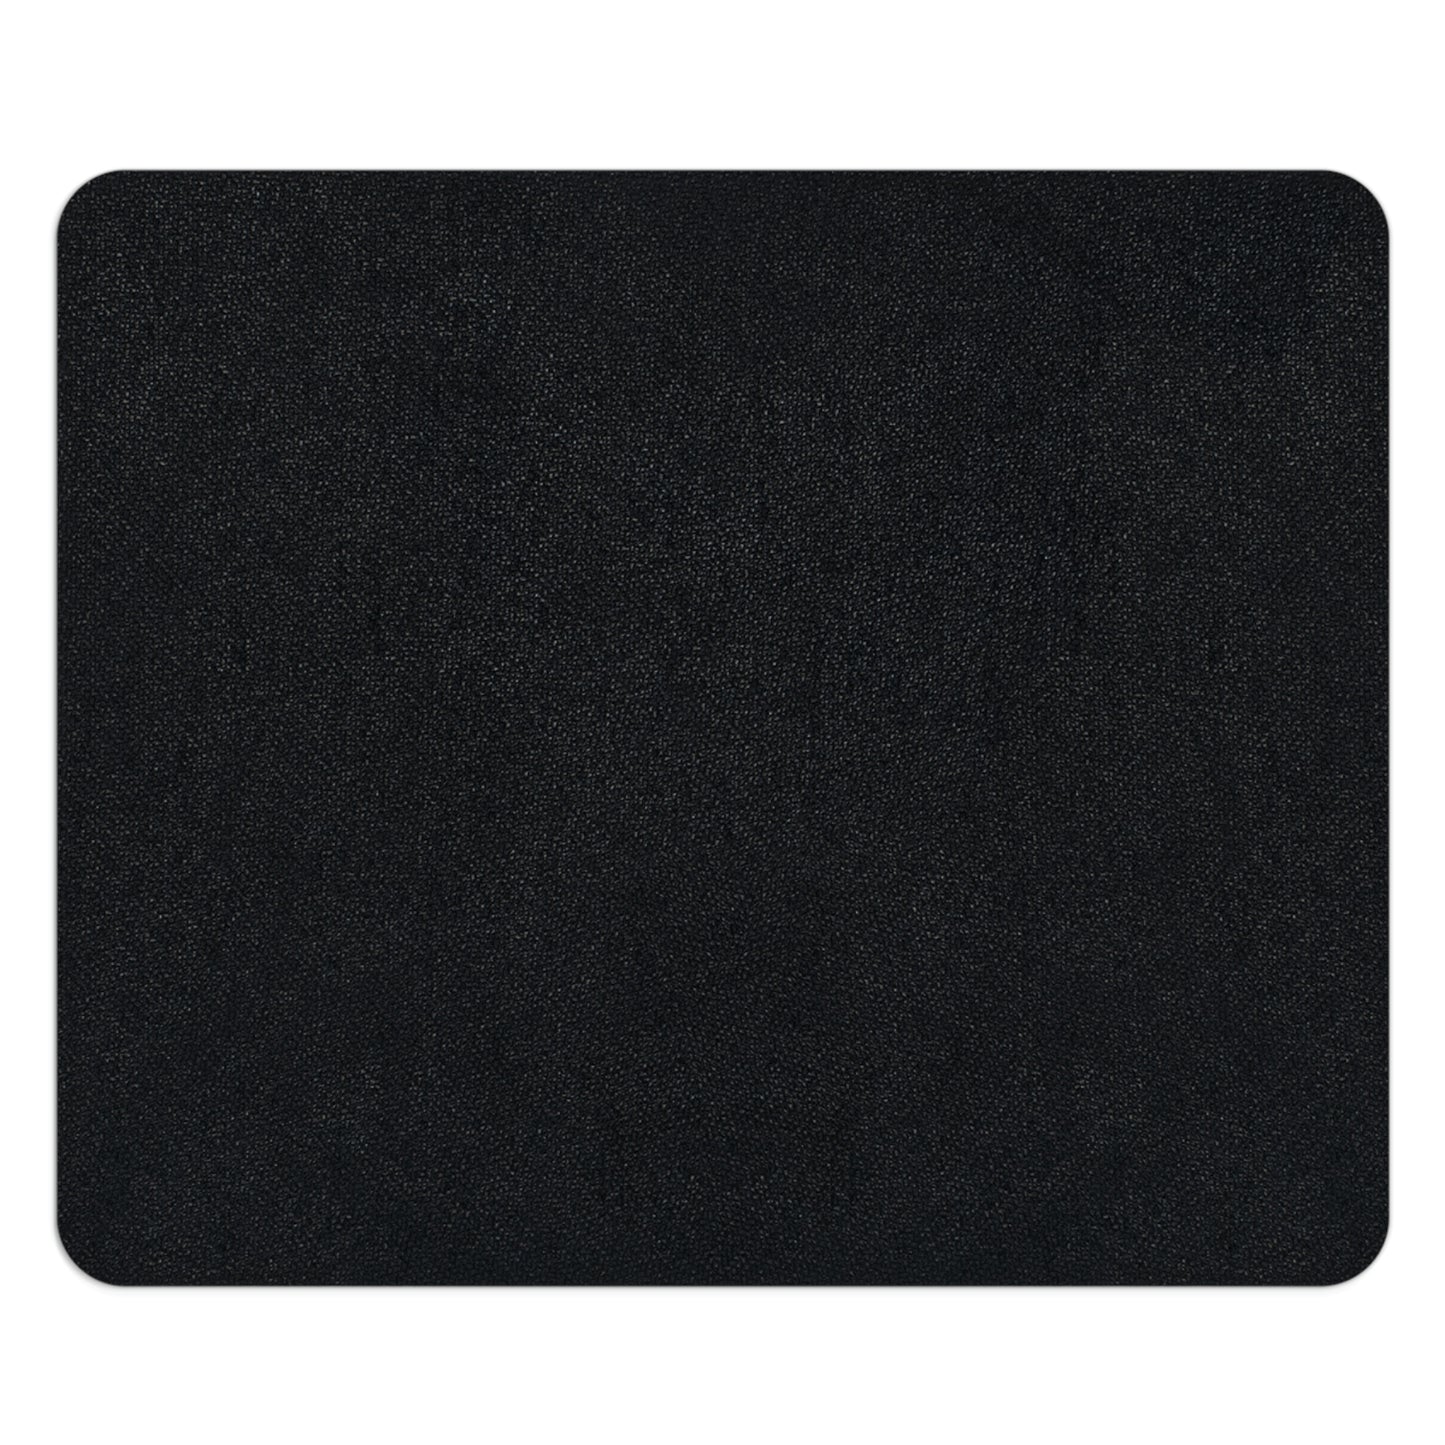 A Pack of Lies!  Rectangle Mouse Pad